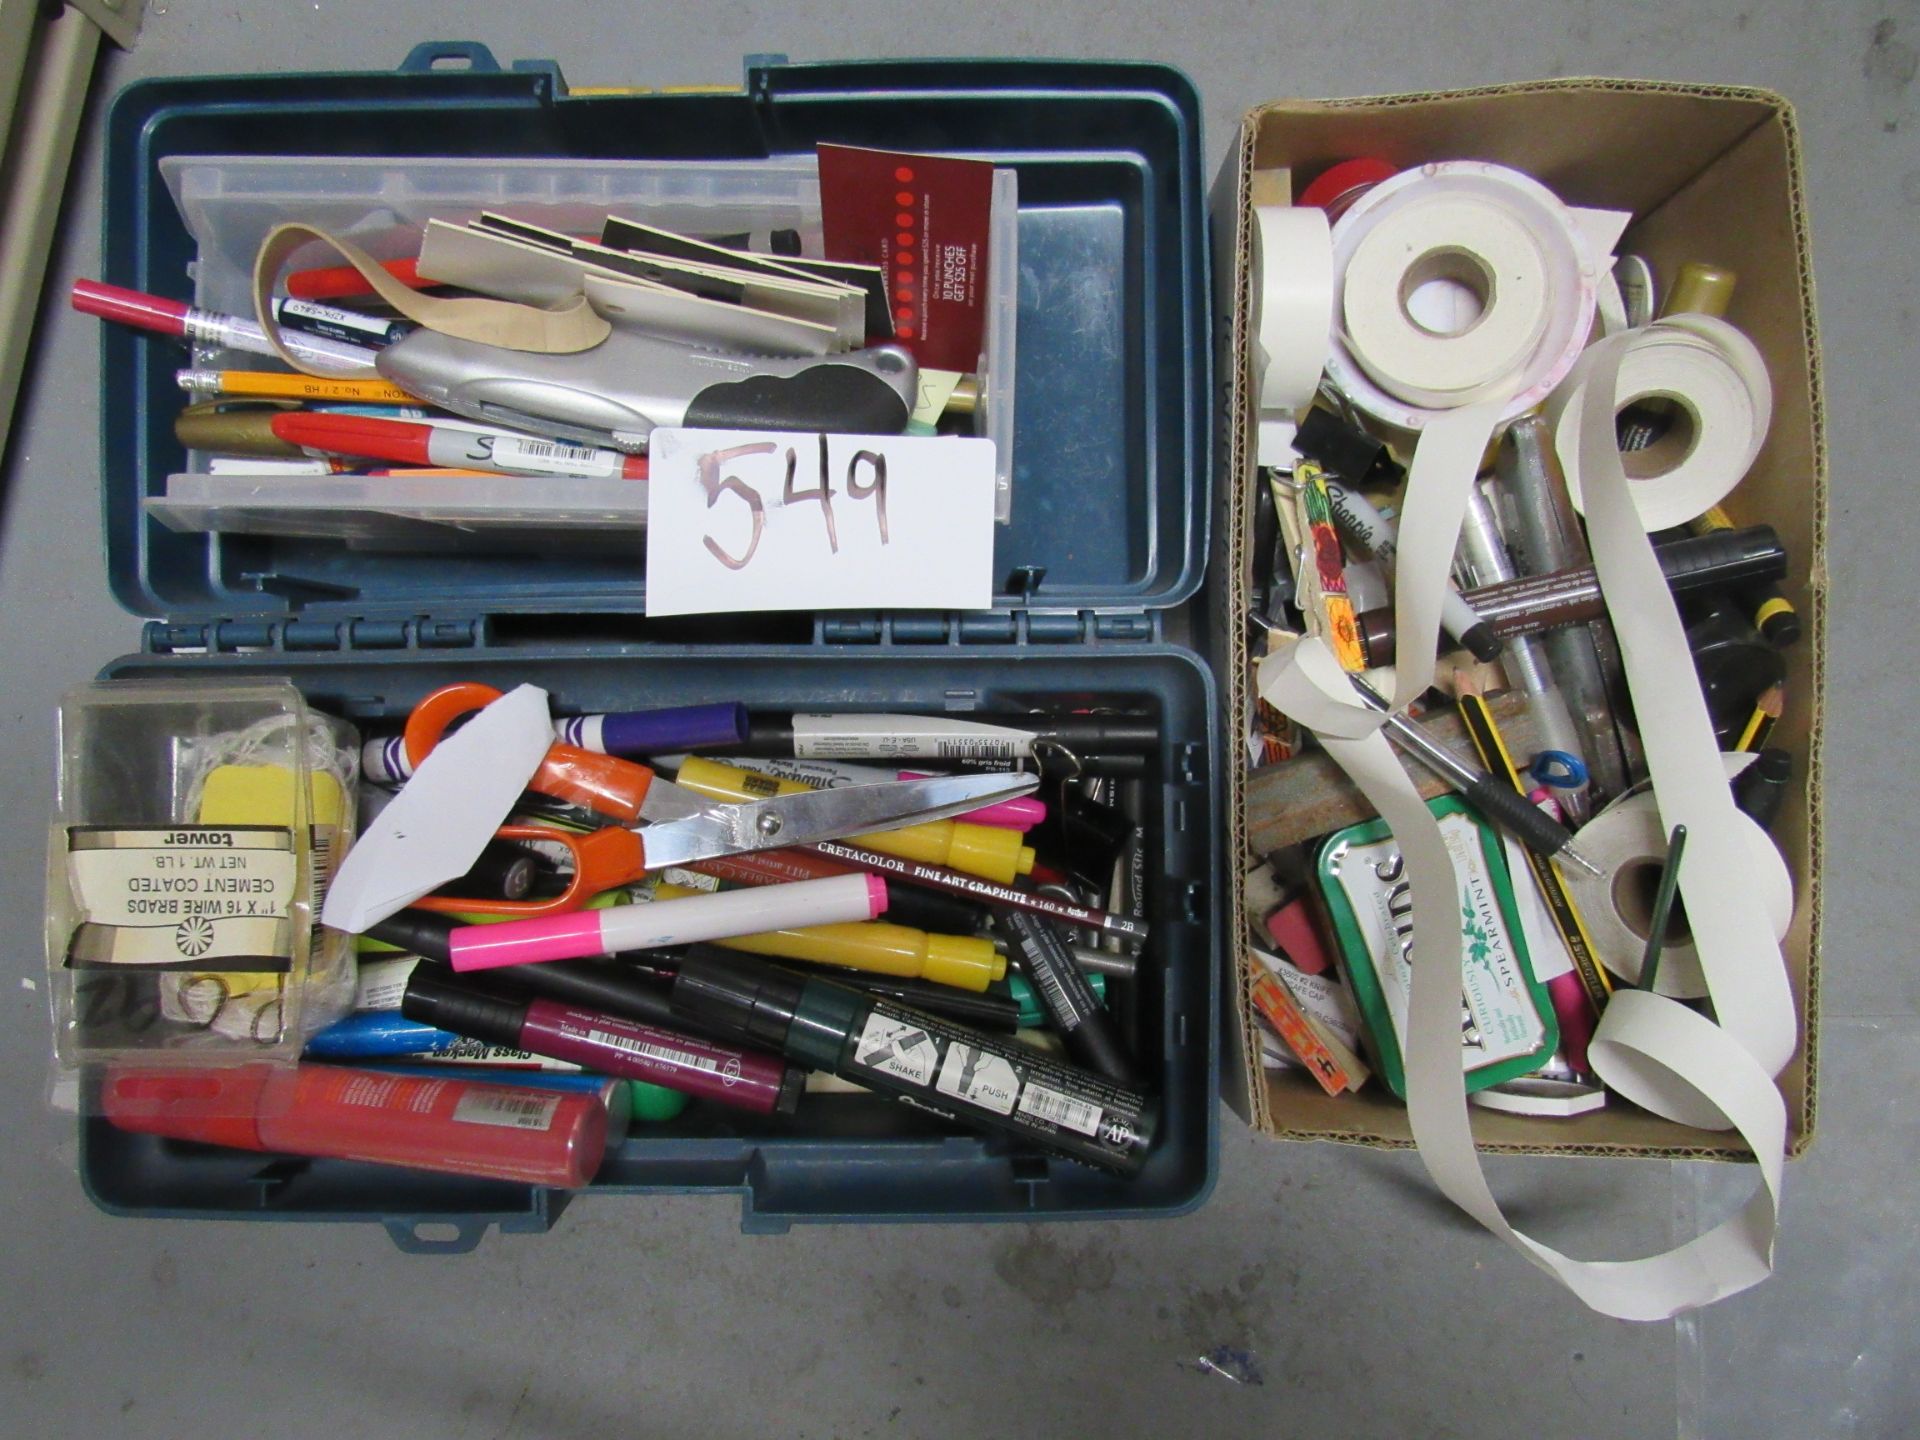 Grp of Office: Markers, Exacto knives, pens; clips, tape